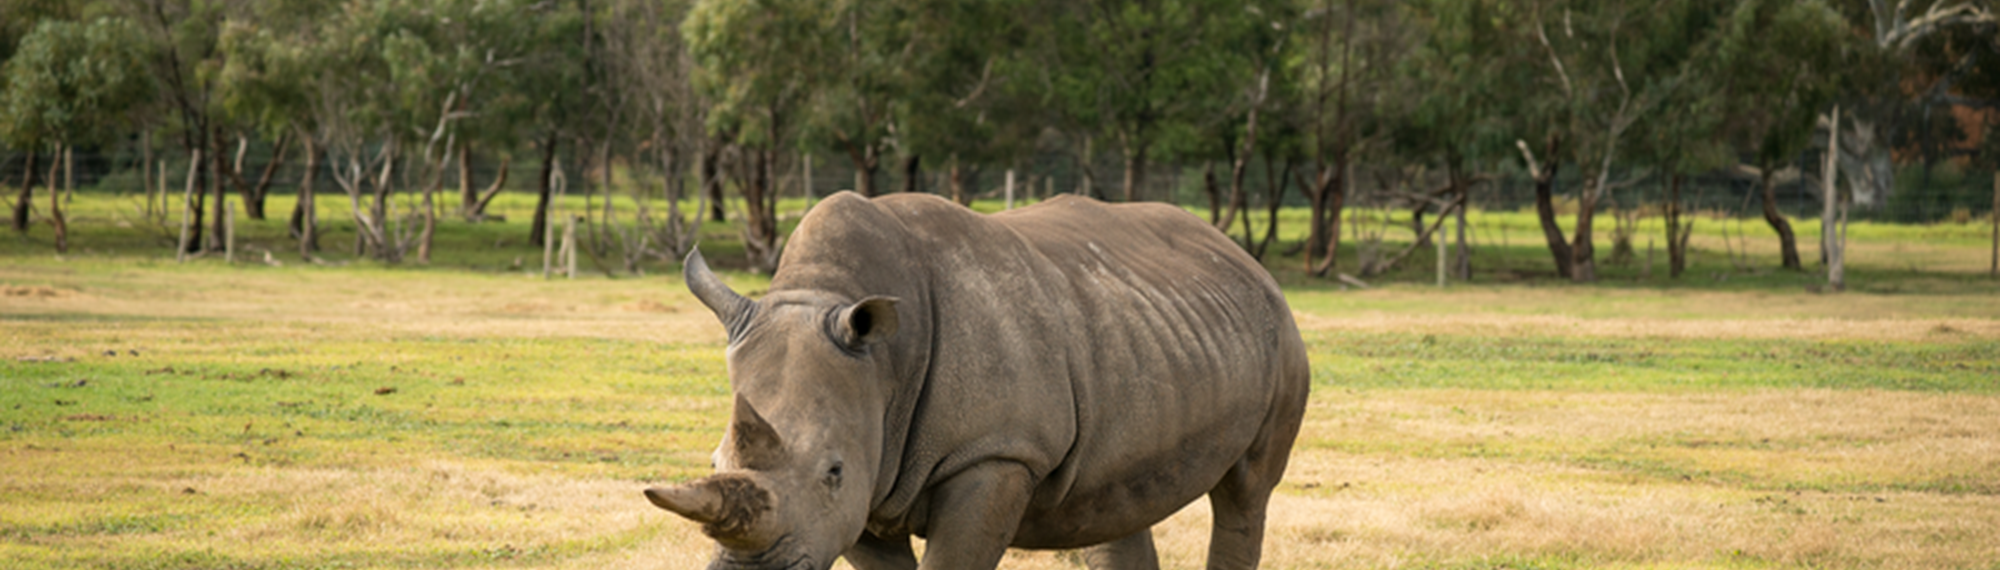 A Rhinoceros on the Savannah of Werribee Zoo, seen from their front-to-right.